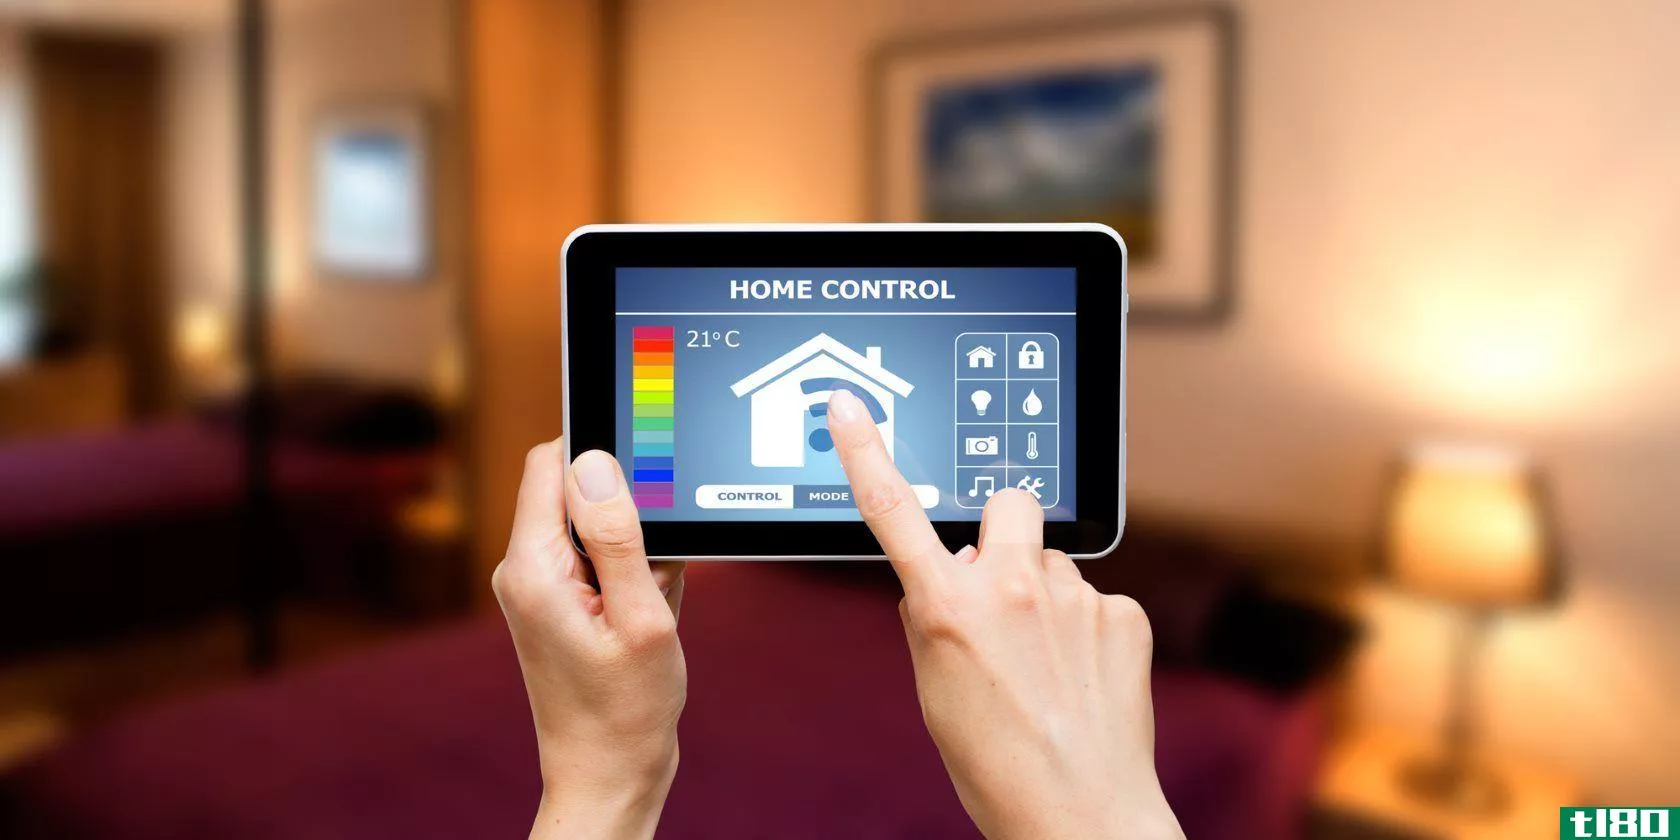 remote-home-control-system-on-a-digital-tablet-or-phone